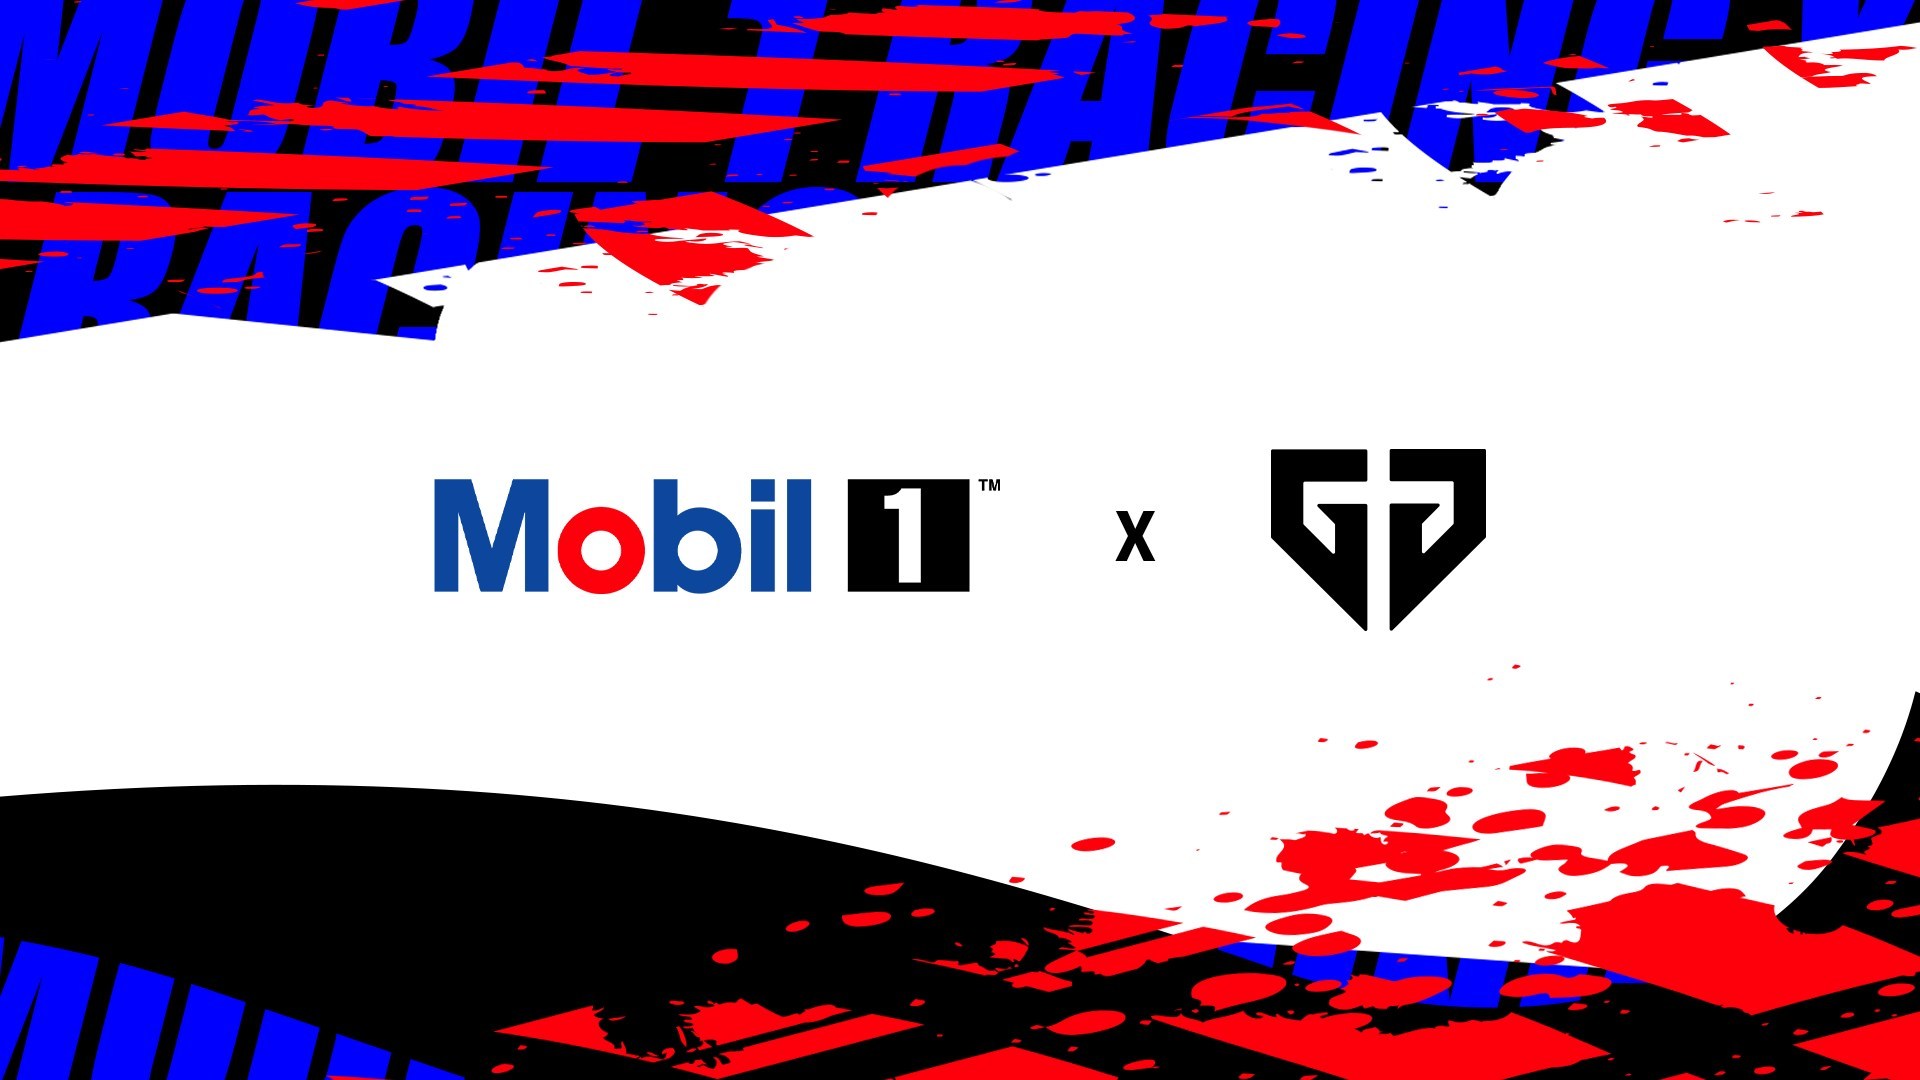 Gen.G Mobil 1 Racing Goes "Full Throttle" into Rocket League Esports with Launch of Two Professional Teams